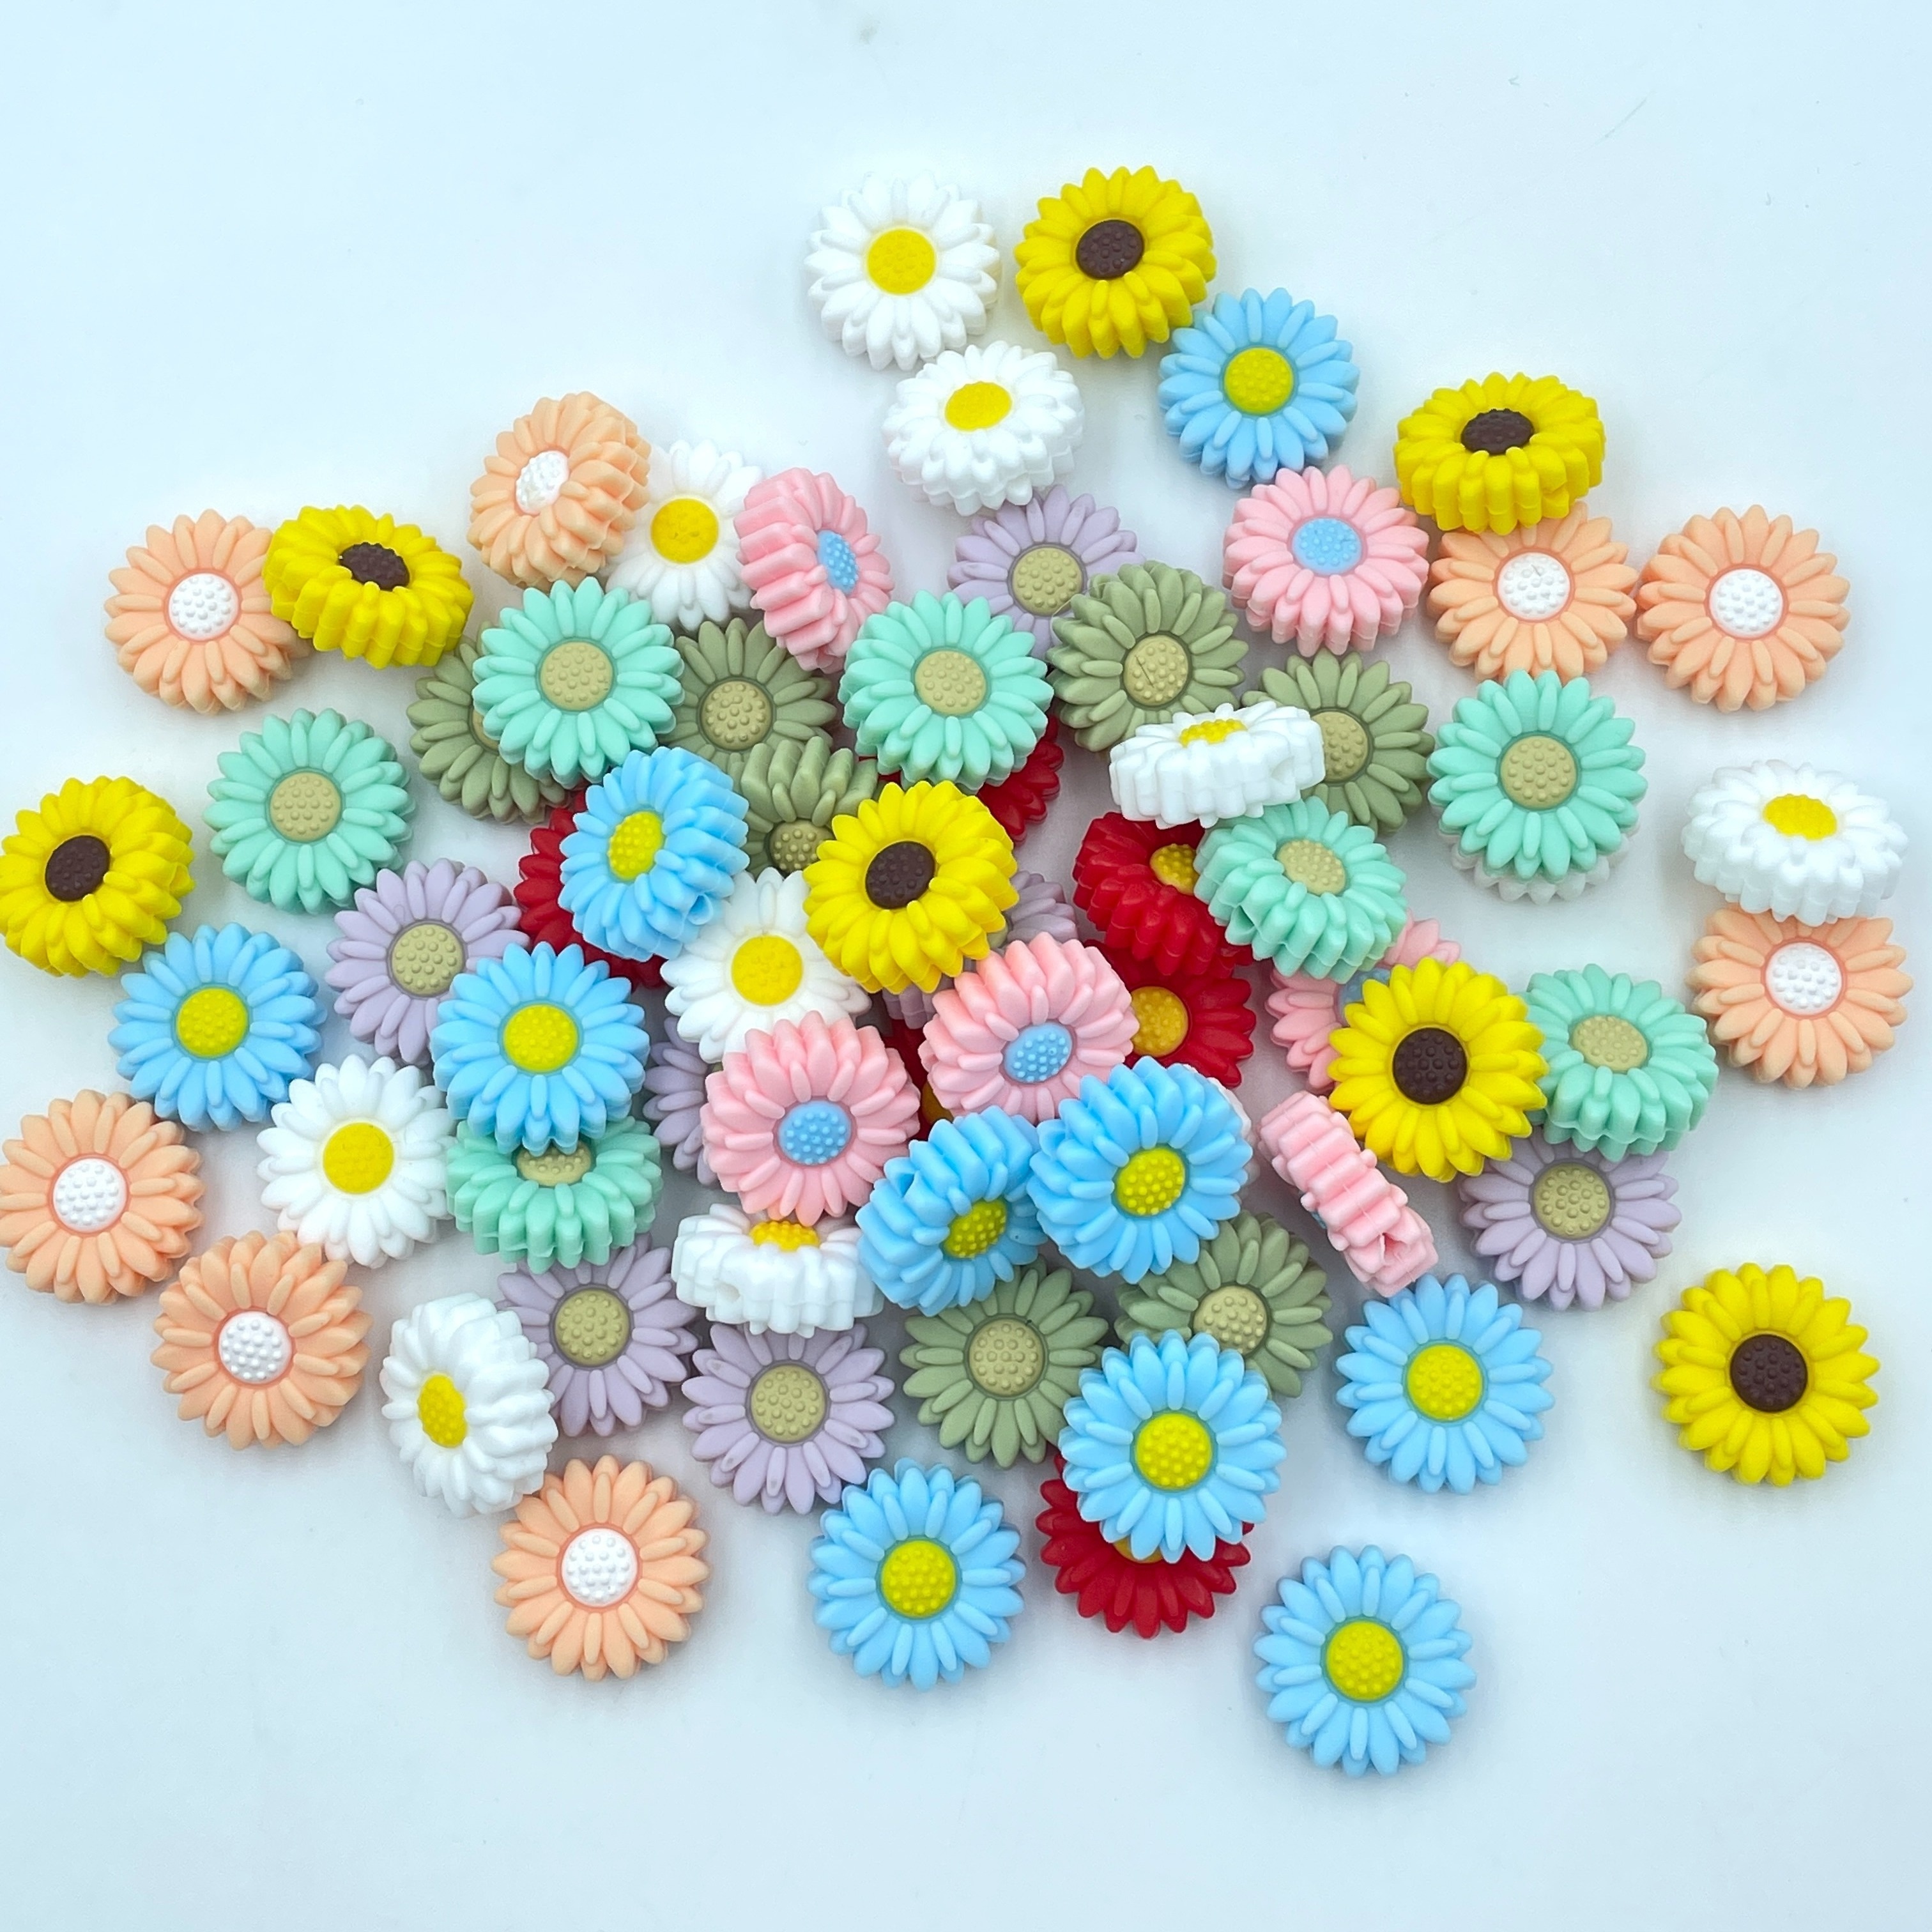 

10 Pcs Cute Flower Silicone Beads, Various Colors, Very Easy To String, Can Make Hand String, Bracelet, Bag Pendant, Car Key Chain, Necklace